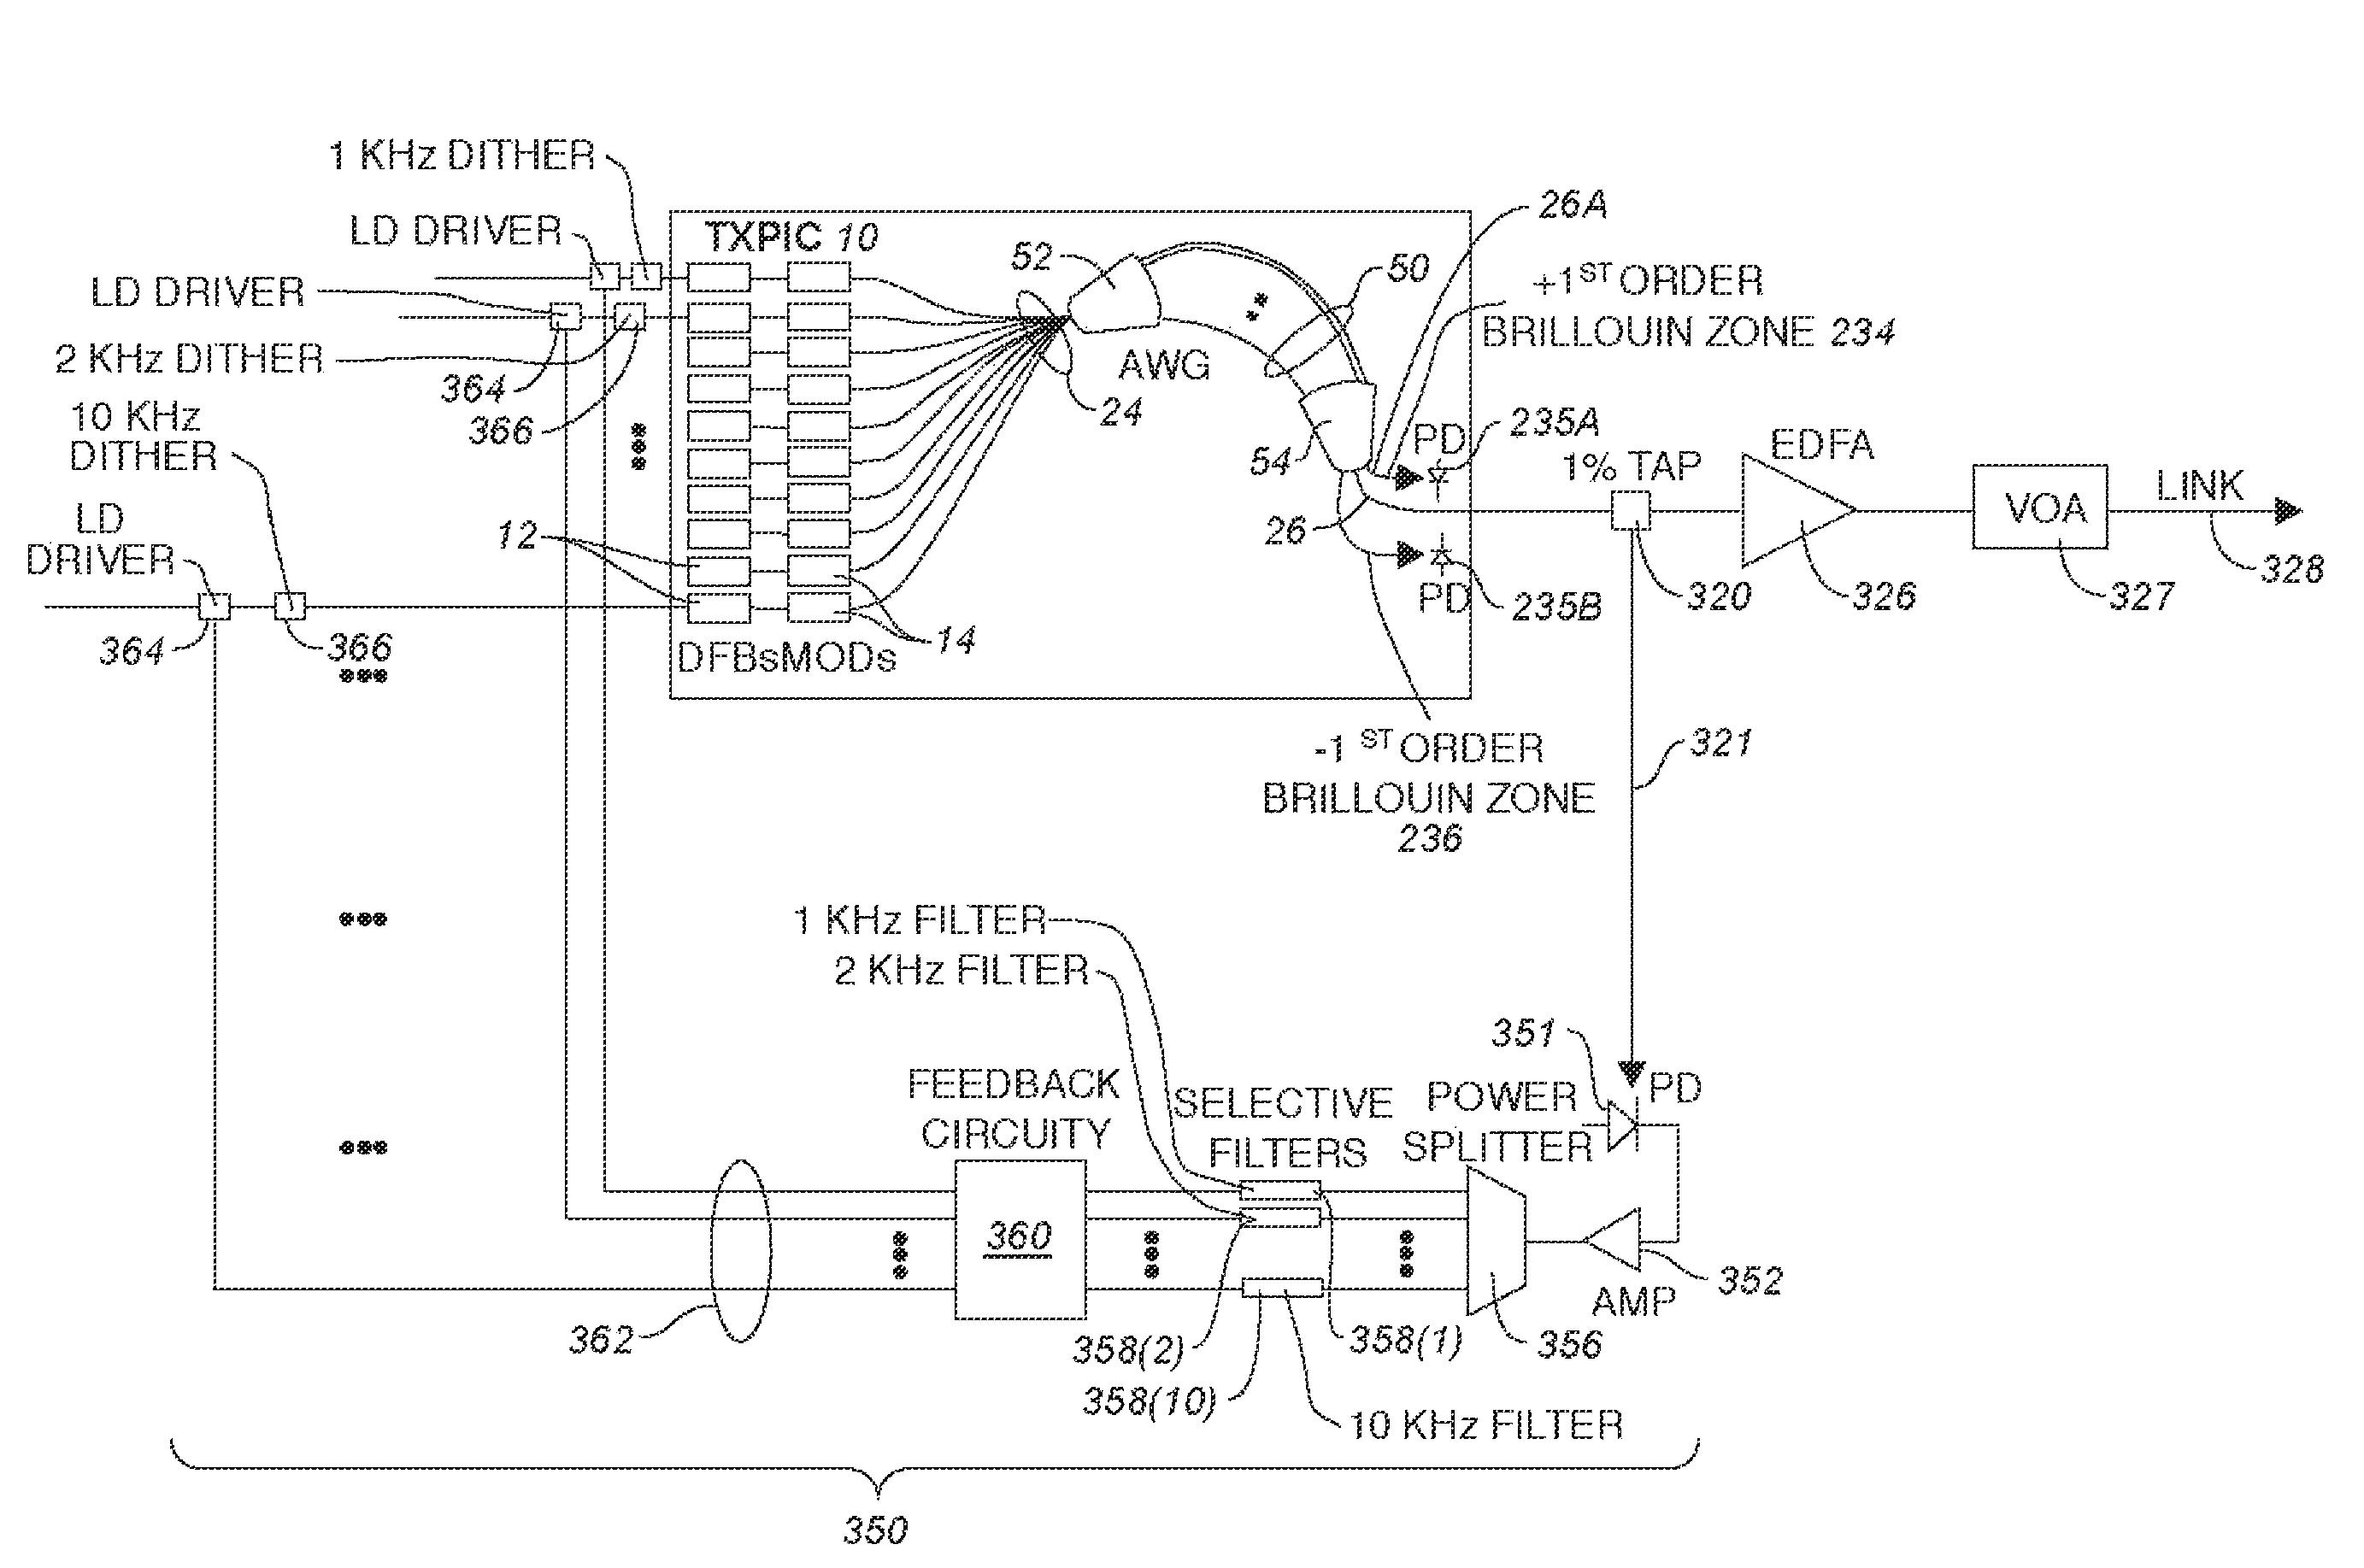 Monolithic transmitter photonic integrated circuit (TxPIC) having tunable modulated sources with feedback system for source power level or wavelength tuning